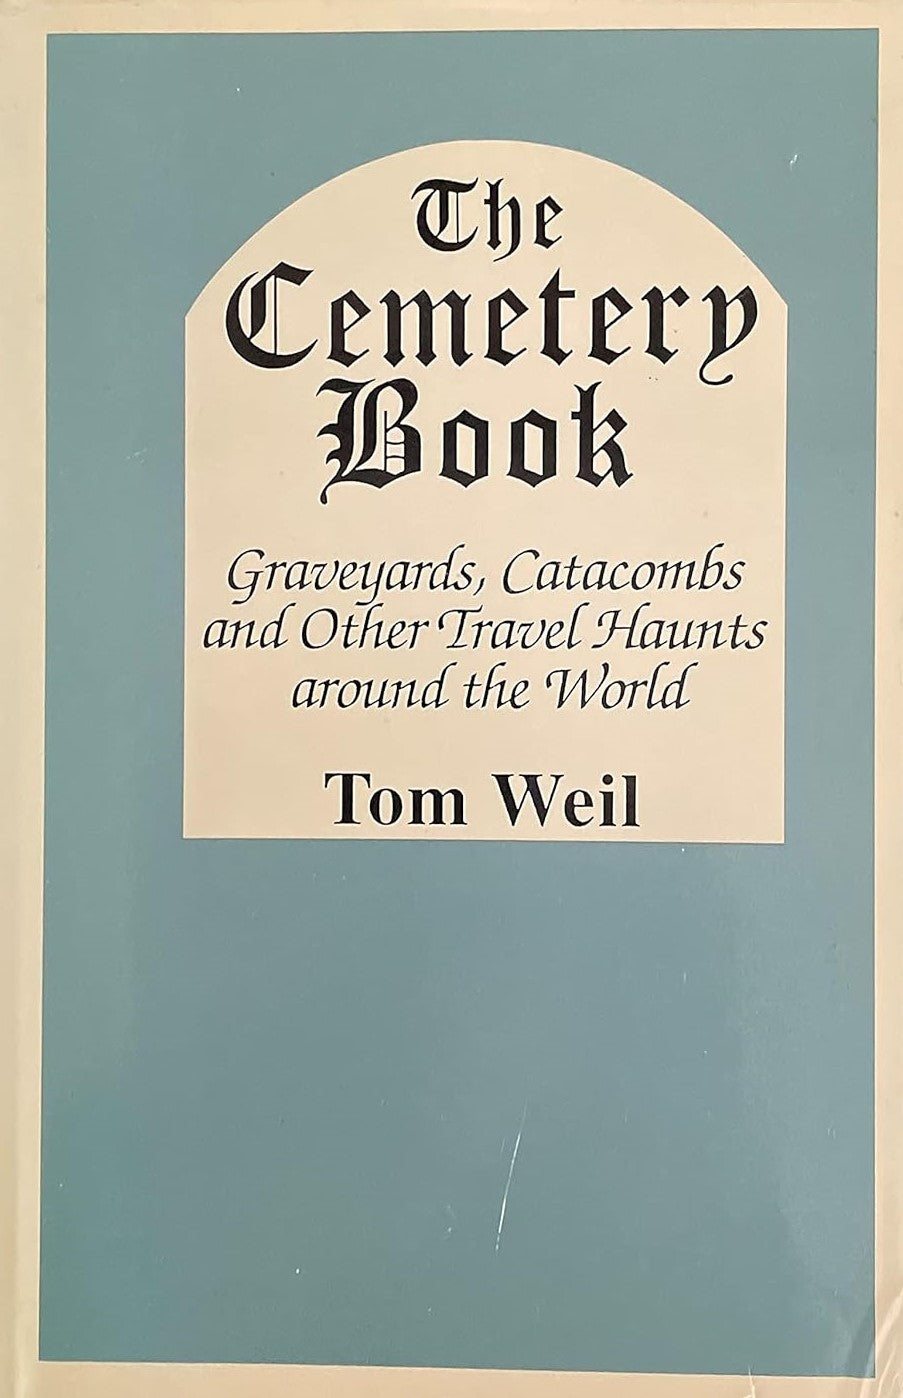 Livre ISBN 0870529161 The Cemetery Book: Graveyards, Catacombs and Other Travel Haunts Around the World (Tom Weil)